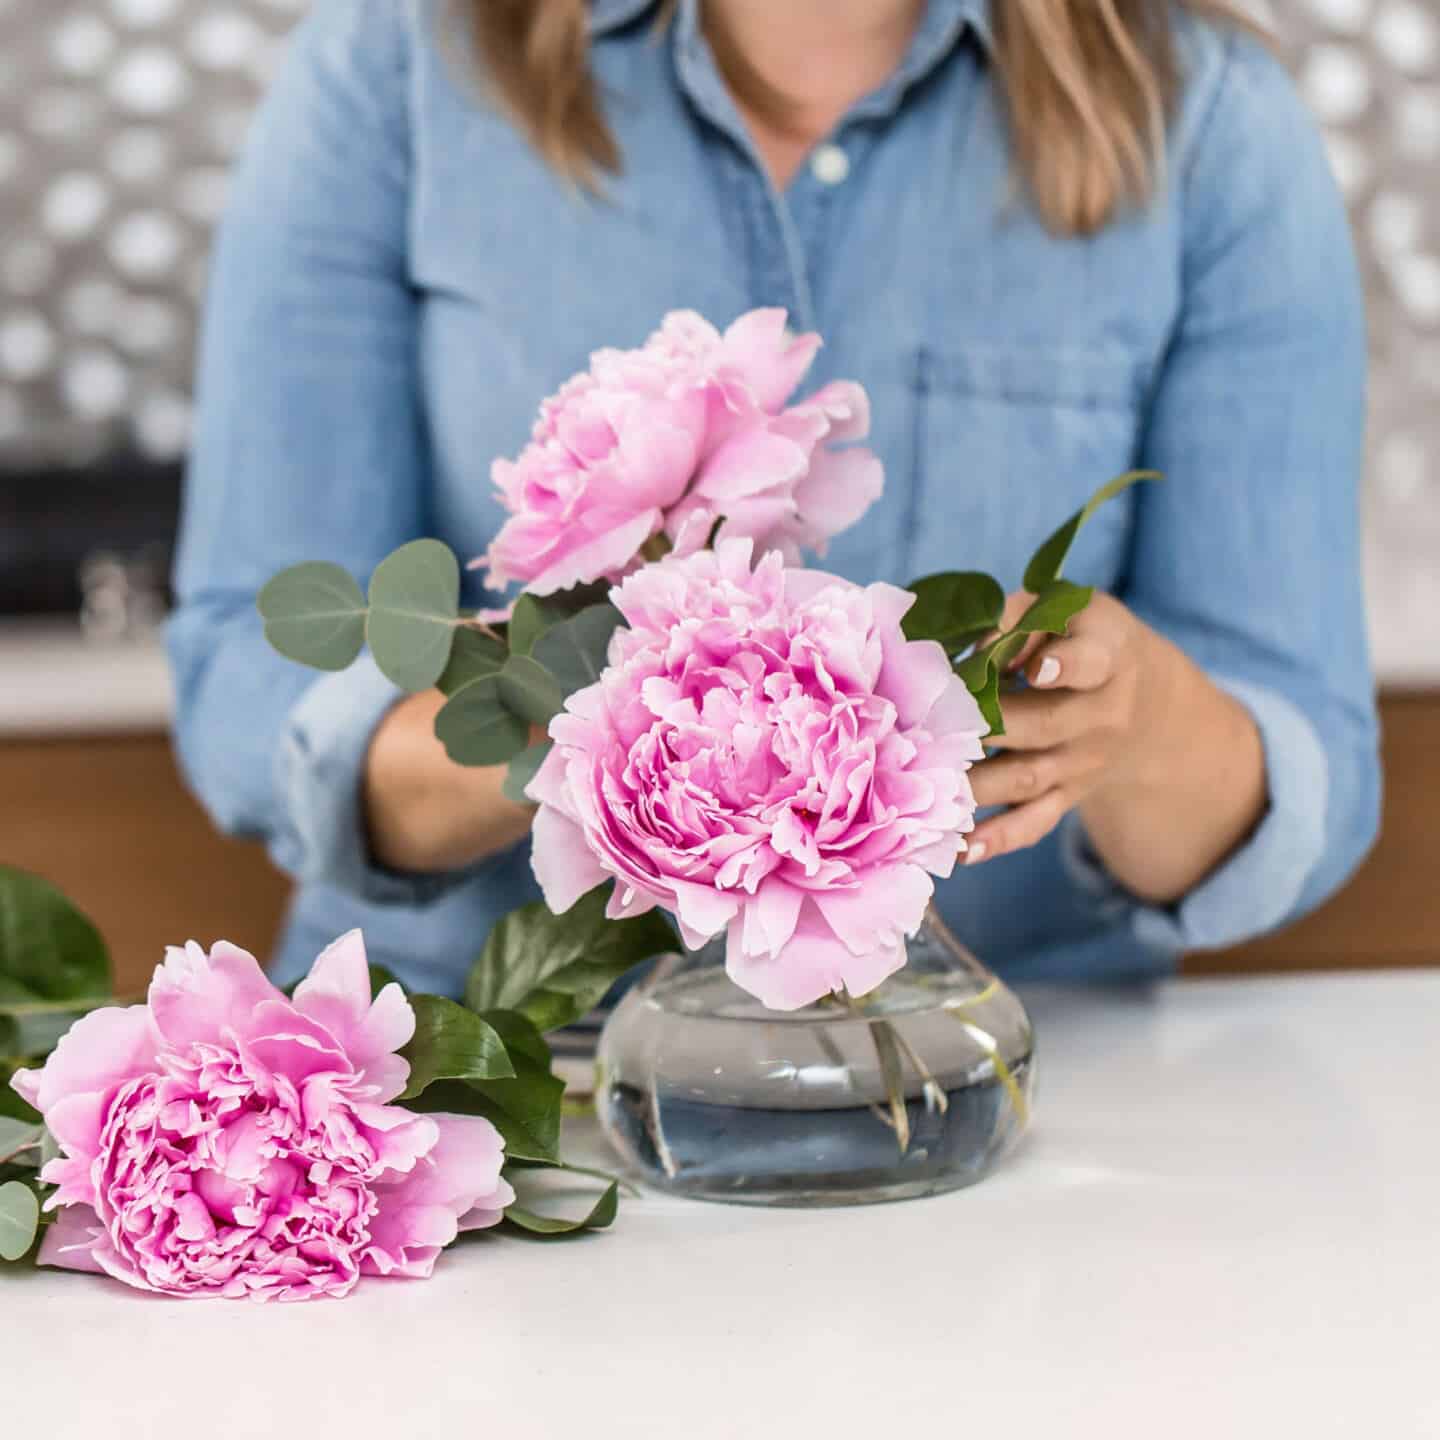 A woman in a blue denim short is arranging pink peonies s in a vase in her kitchen